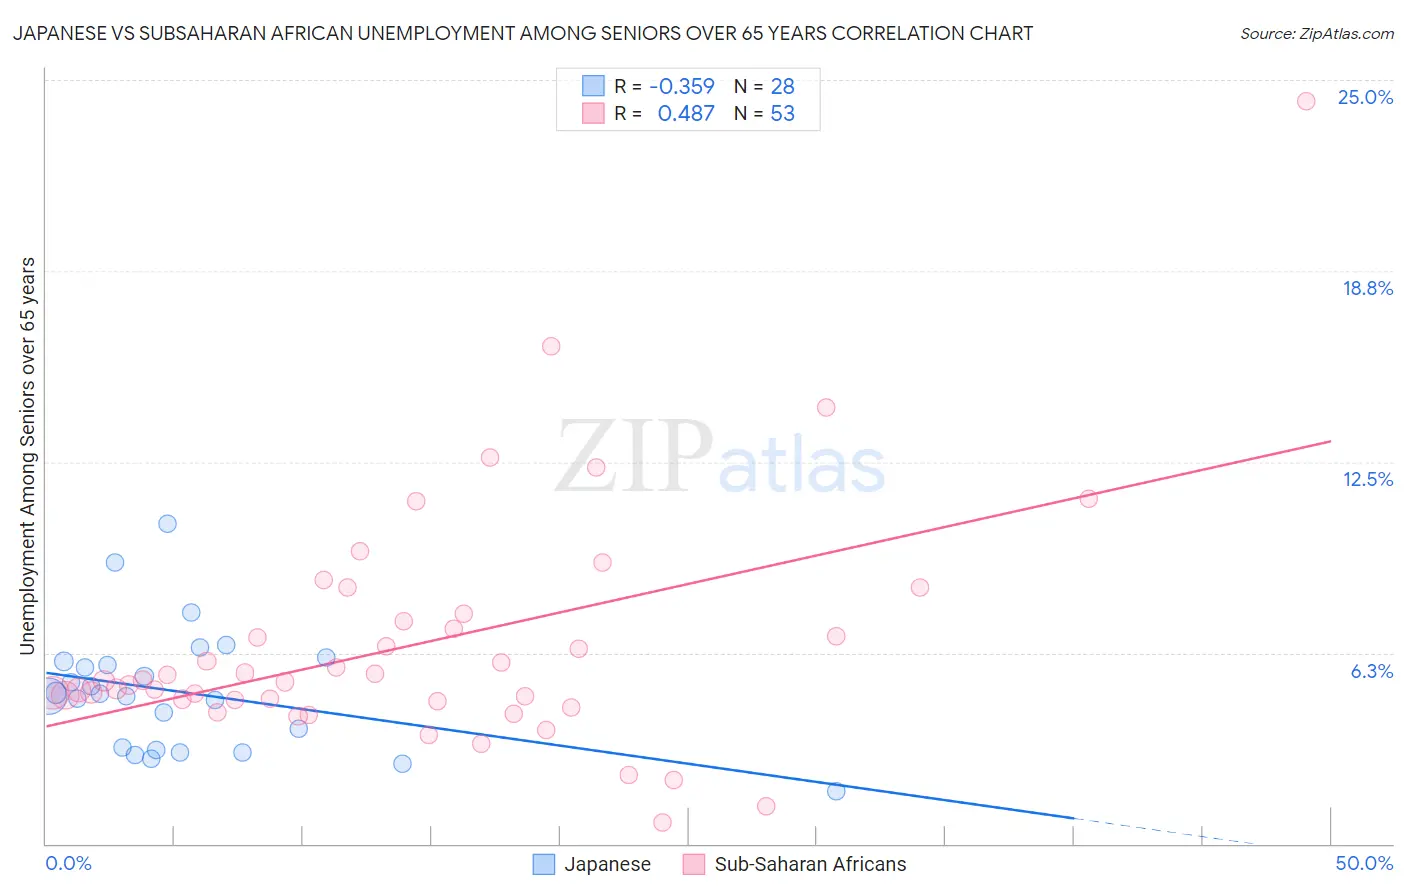 Japanese vs Subsaharan African Unemployment Among Seniors over 65 years